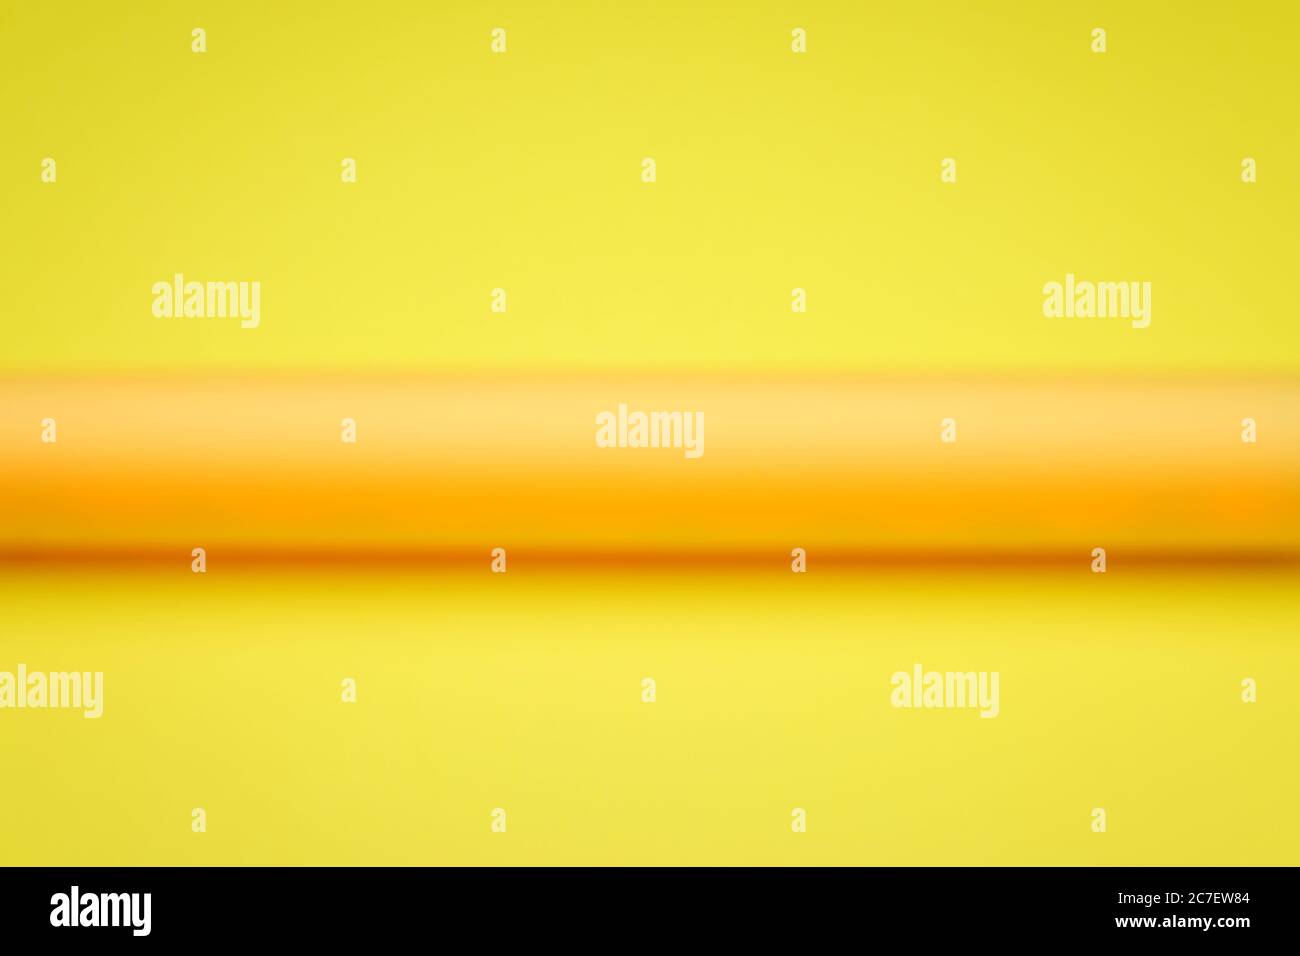 A Blurred Orange Tube, Showing the Horizontal Cylinder Lines Against a Yellow Background. Stock Photo